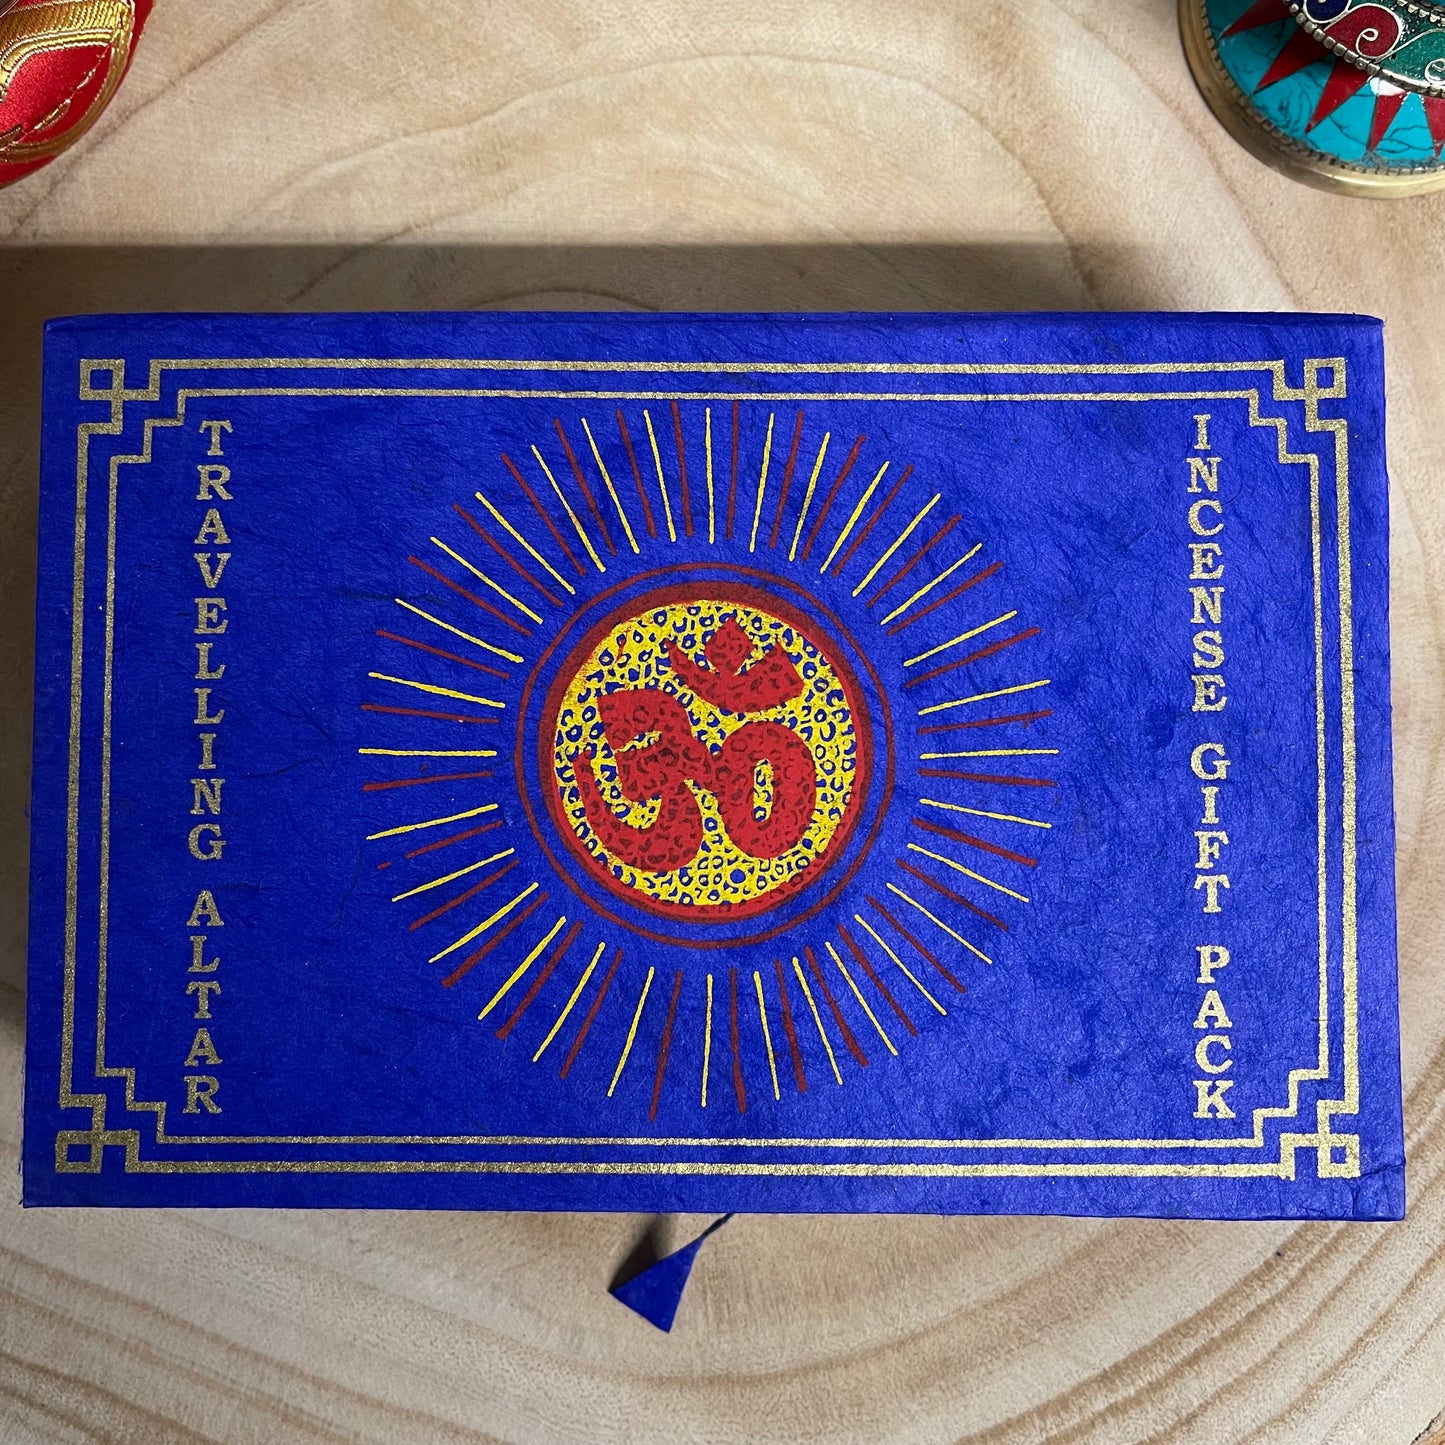 Traveling Alter And incense Gift Box Blue Om